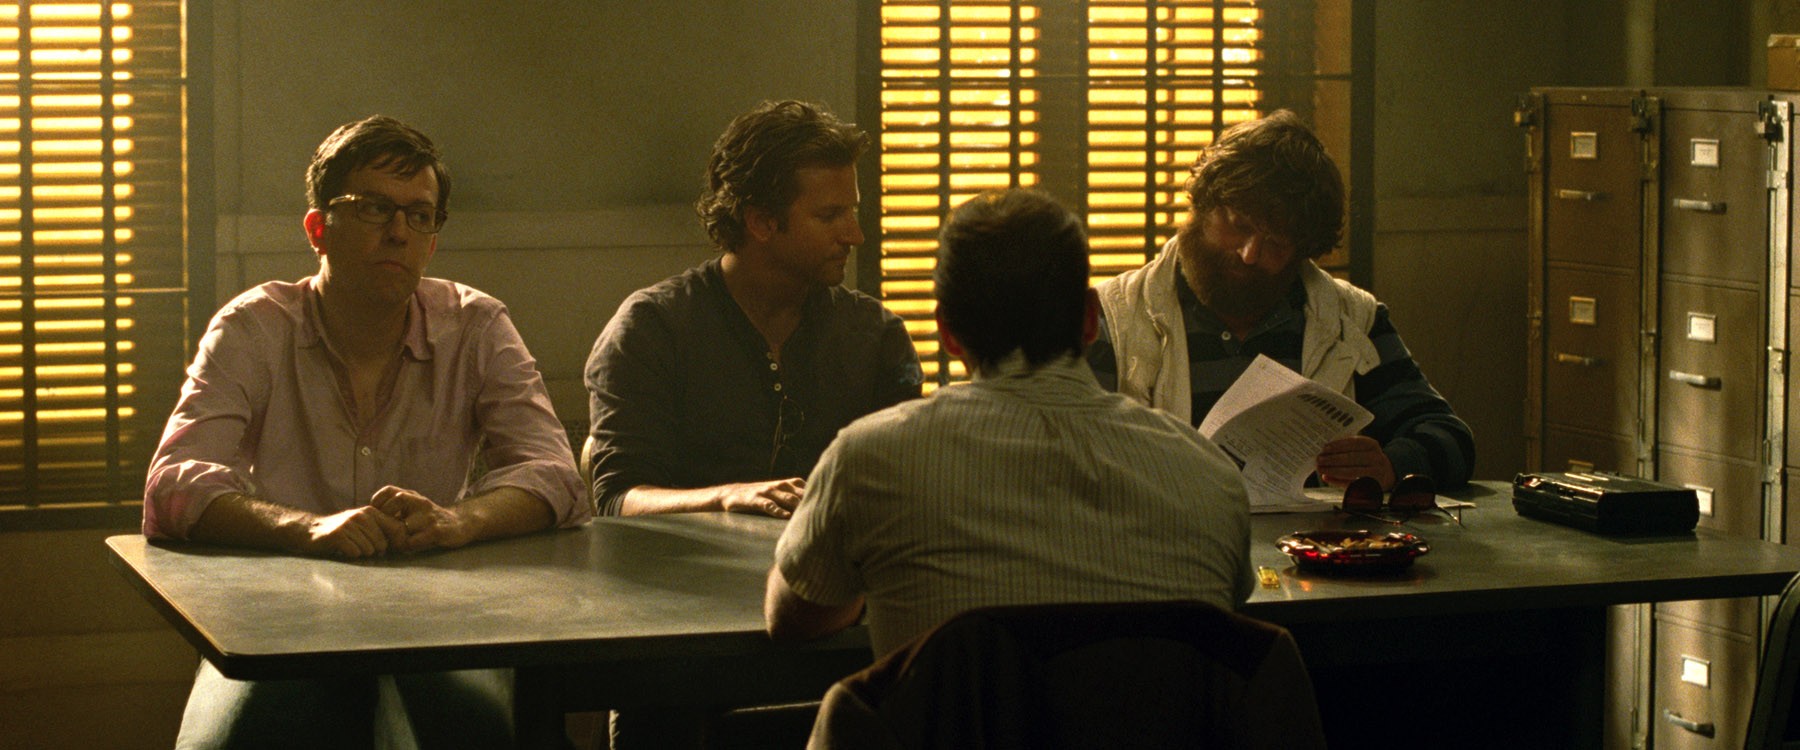 Ed Helms, Bradley Cooper and Zach Galifianakis in Warner Bros. Pictures' The Hangover Part III (2013)